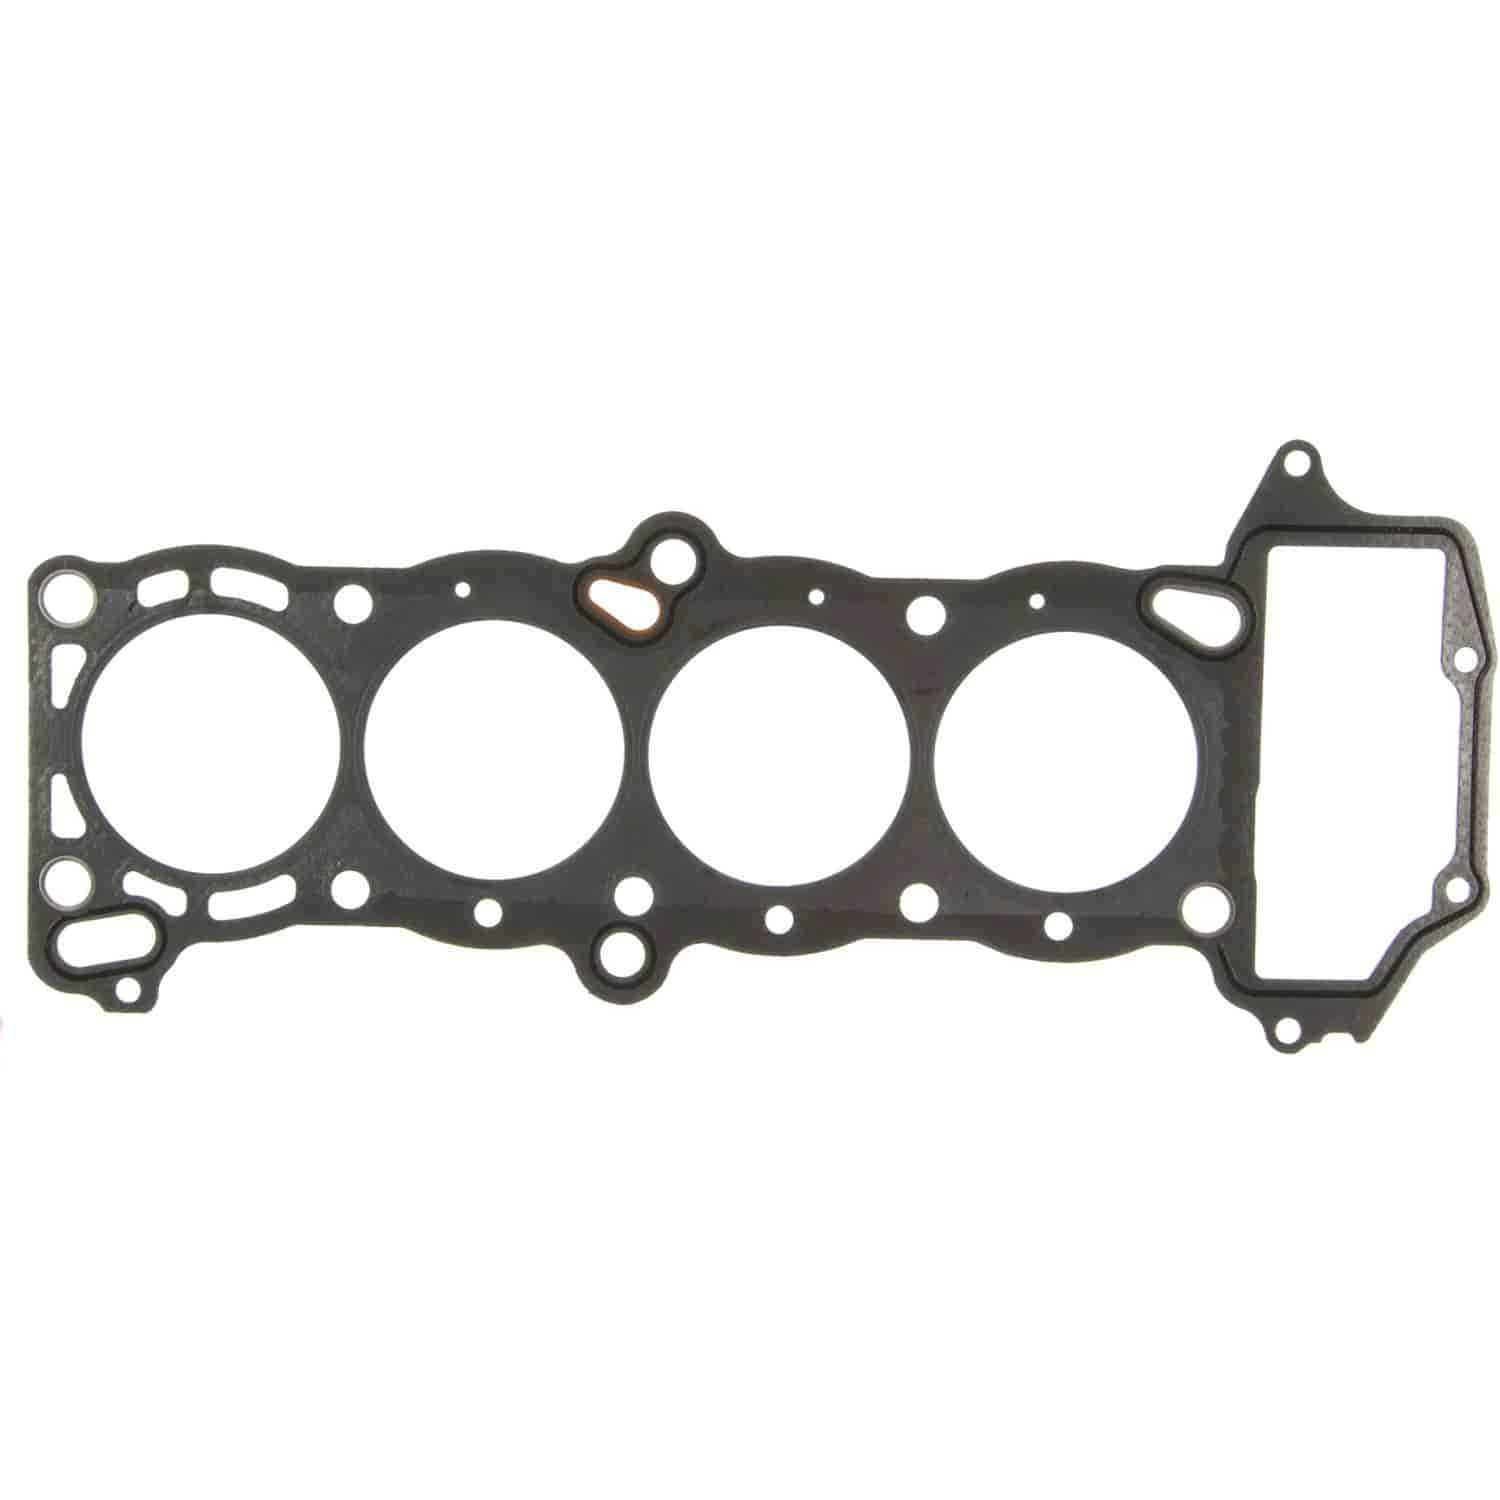 Cylinder Head Gasket Dearborn Wood Ford Trac C120 Late 2N 8N 9N 3 ring Conflict number went